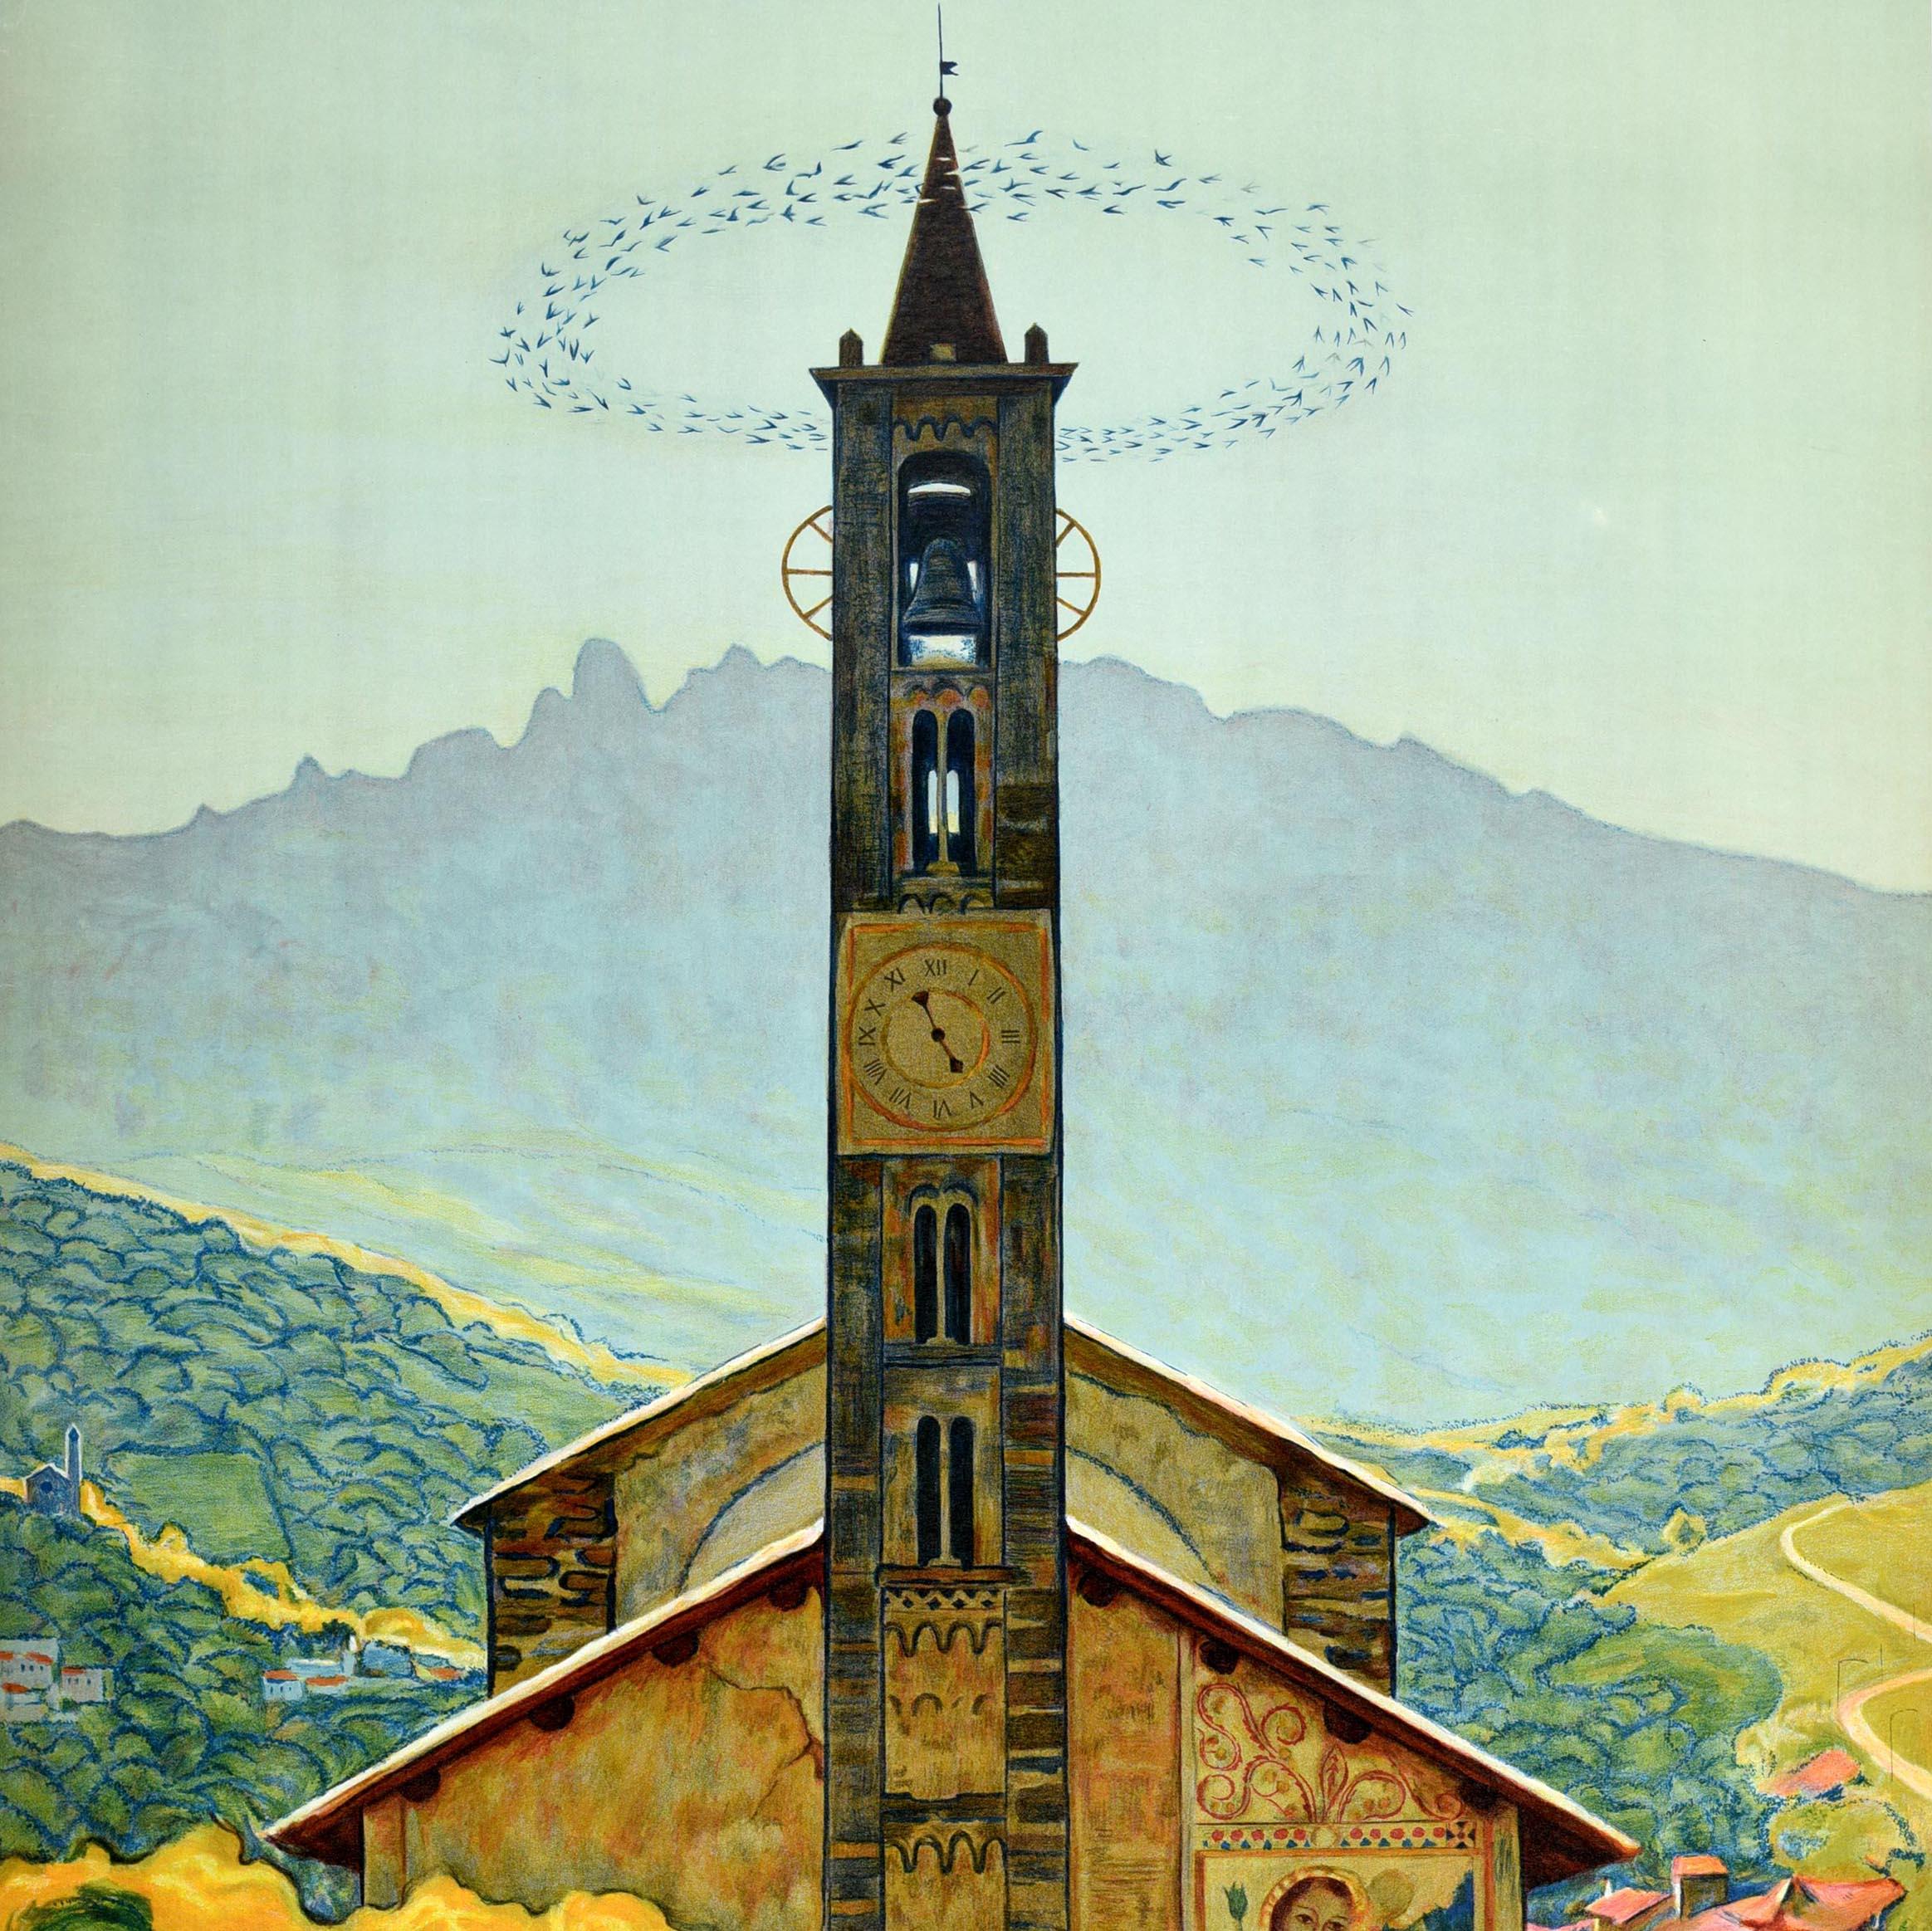 Original vintage travel poster for Tesserete Lugano Svizzera Suisse Schweiz Switzerland featuring a stunning painting by Luigi Rossi (1853-1923) of the historic 9th century Church of Santo Stefano depicting the clock and decorative image on the side